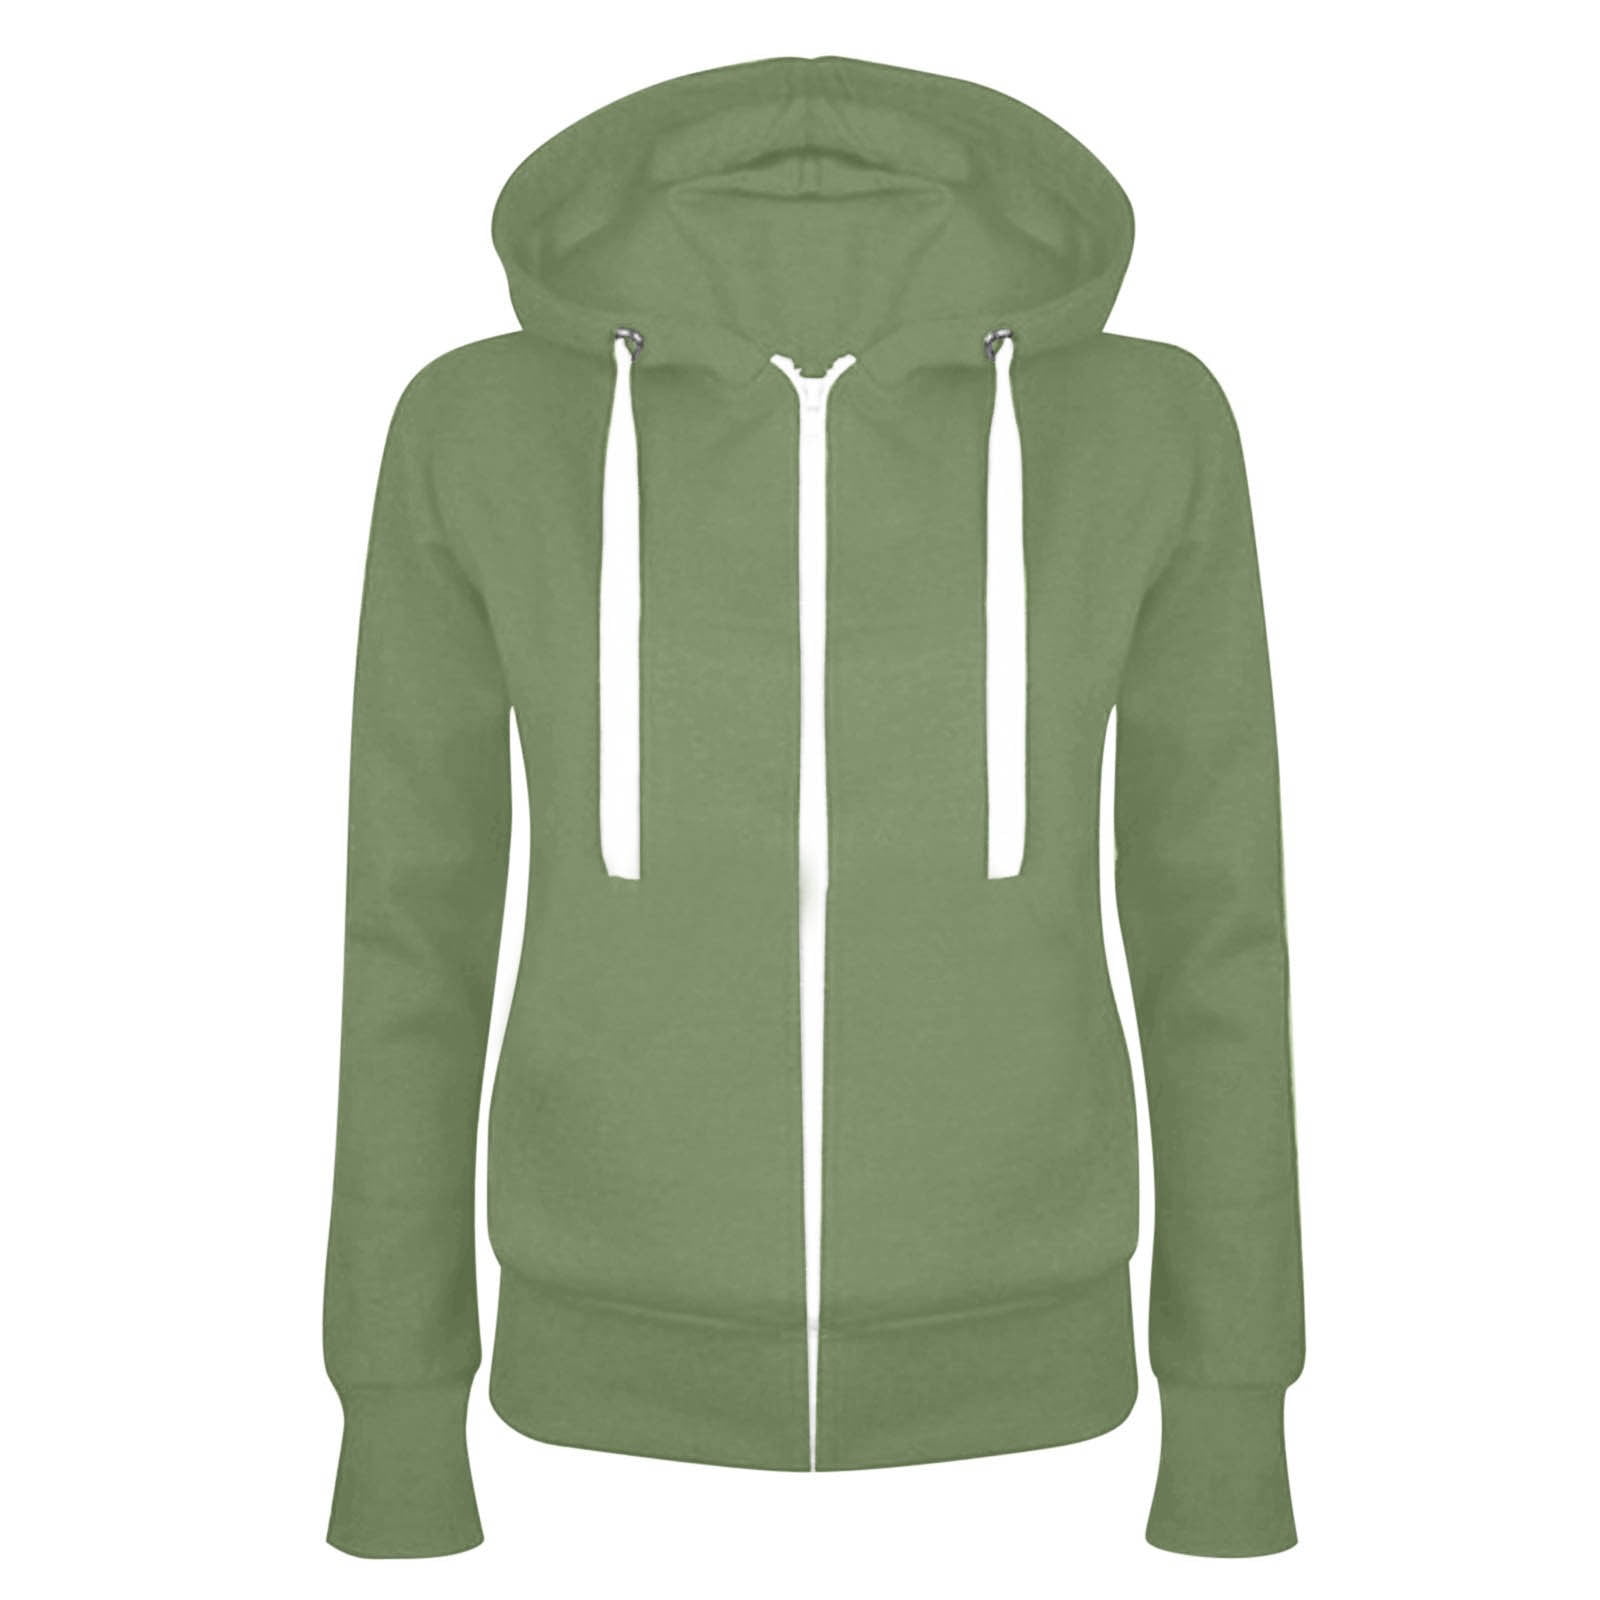 Youngnet fall hoodies for women,10 cent items,1 dollar stuff,sweatshirtes  under 30 dollars for women,warm sweatshirts for women,2 dollar items only,buy  again my orders A-black at  Women's Clothing store